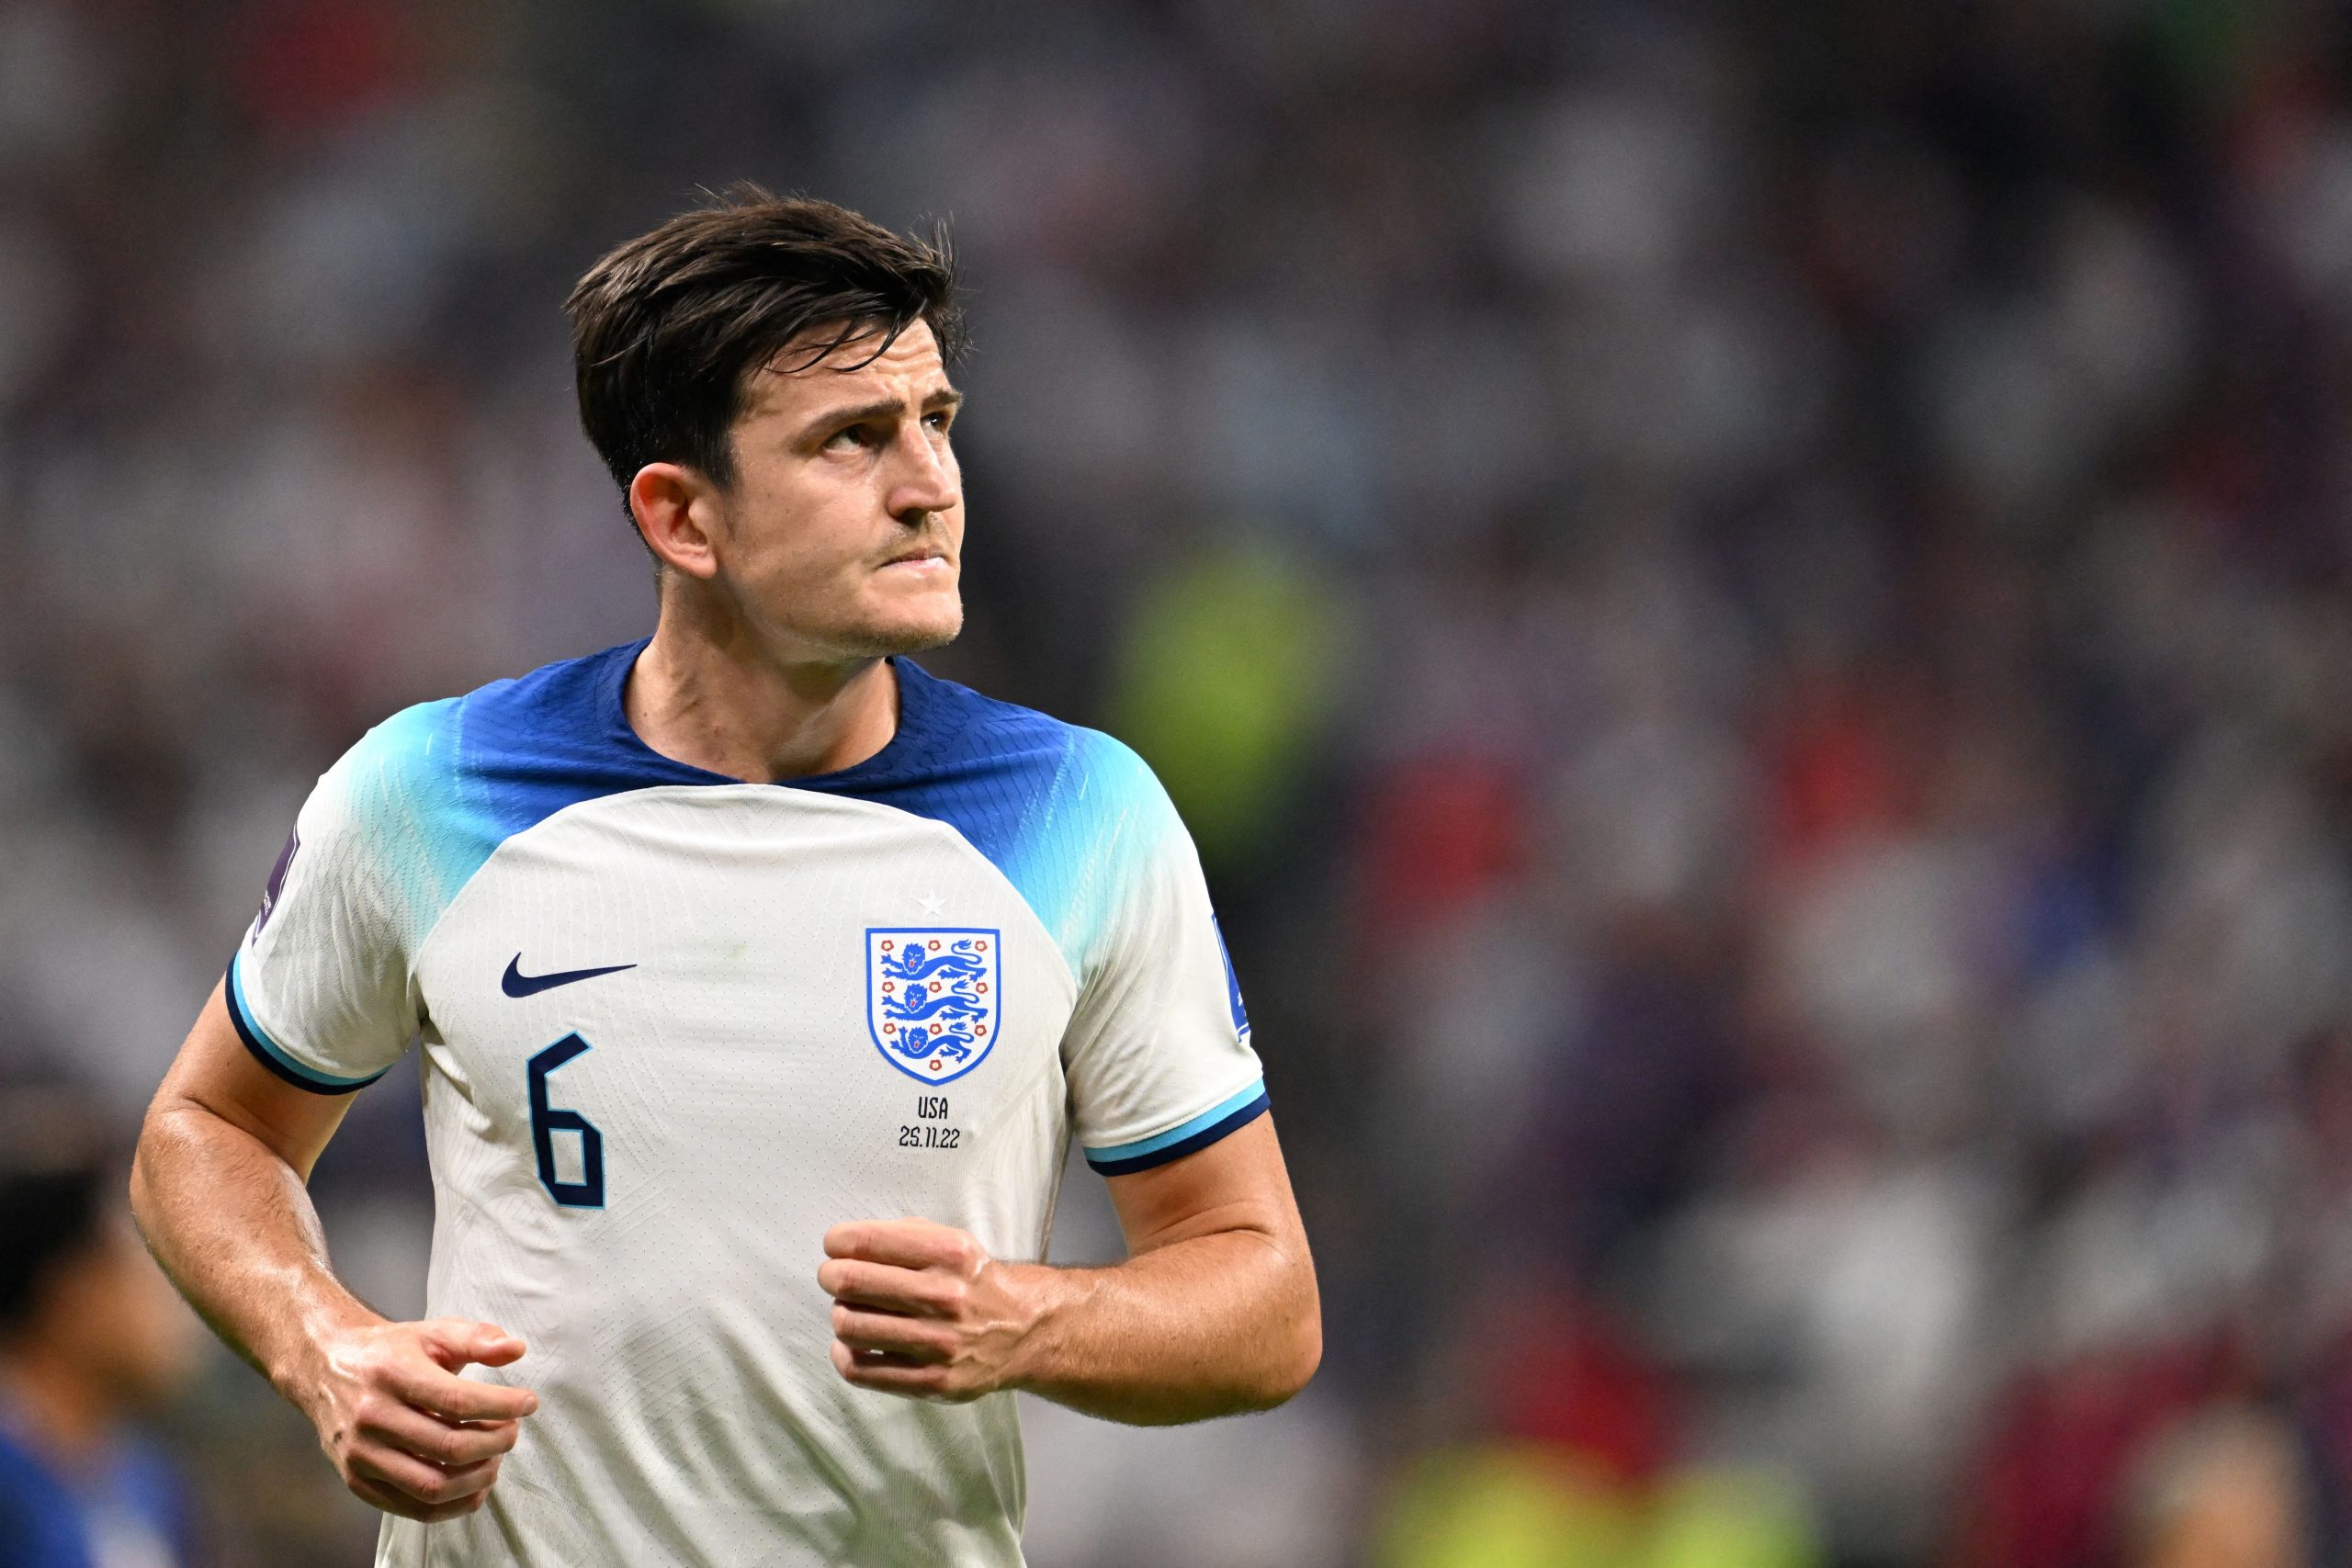 England's defender #06 Harry Maguire looks on during the Qatar 2022 World Cup Group B football match between England and USA at the Al-Bayt Stadium in Al Khor, north of Doha on November 25, 2022